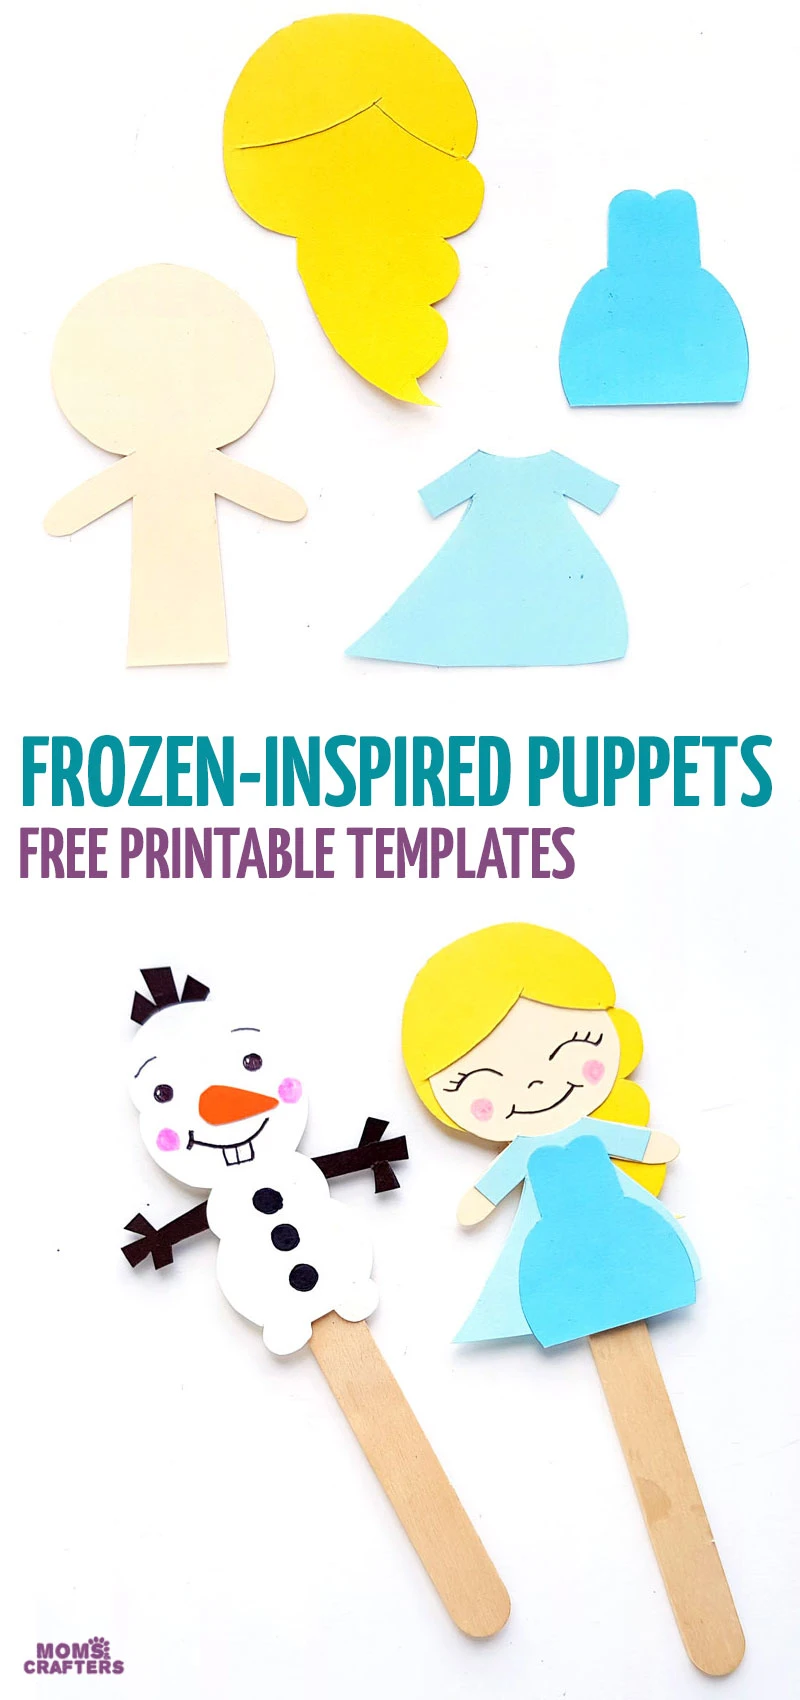 Click for free printable Frozen paper craft templates for Elsa and Olaf puppets and bookmarks!